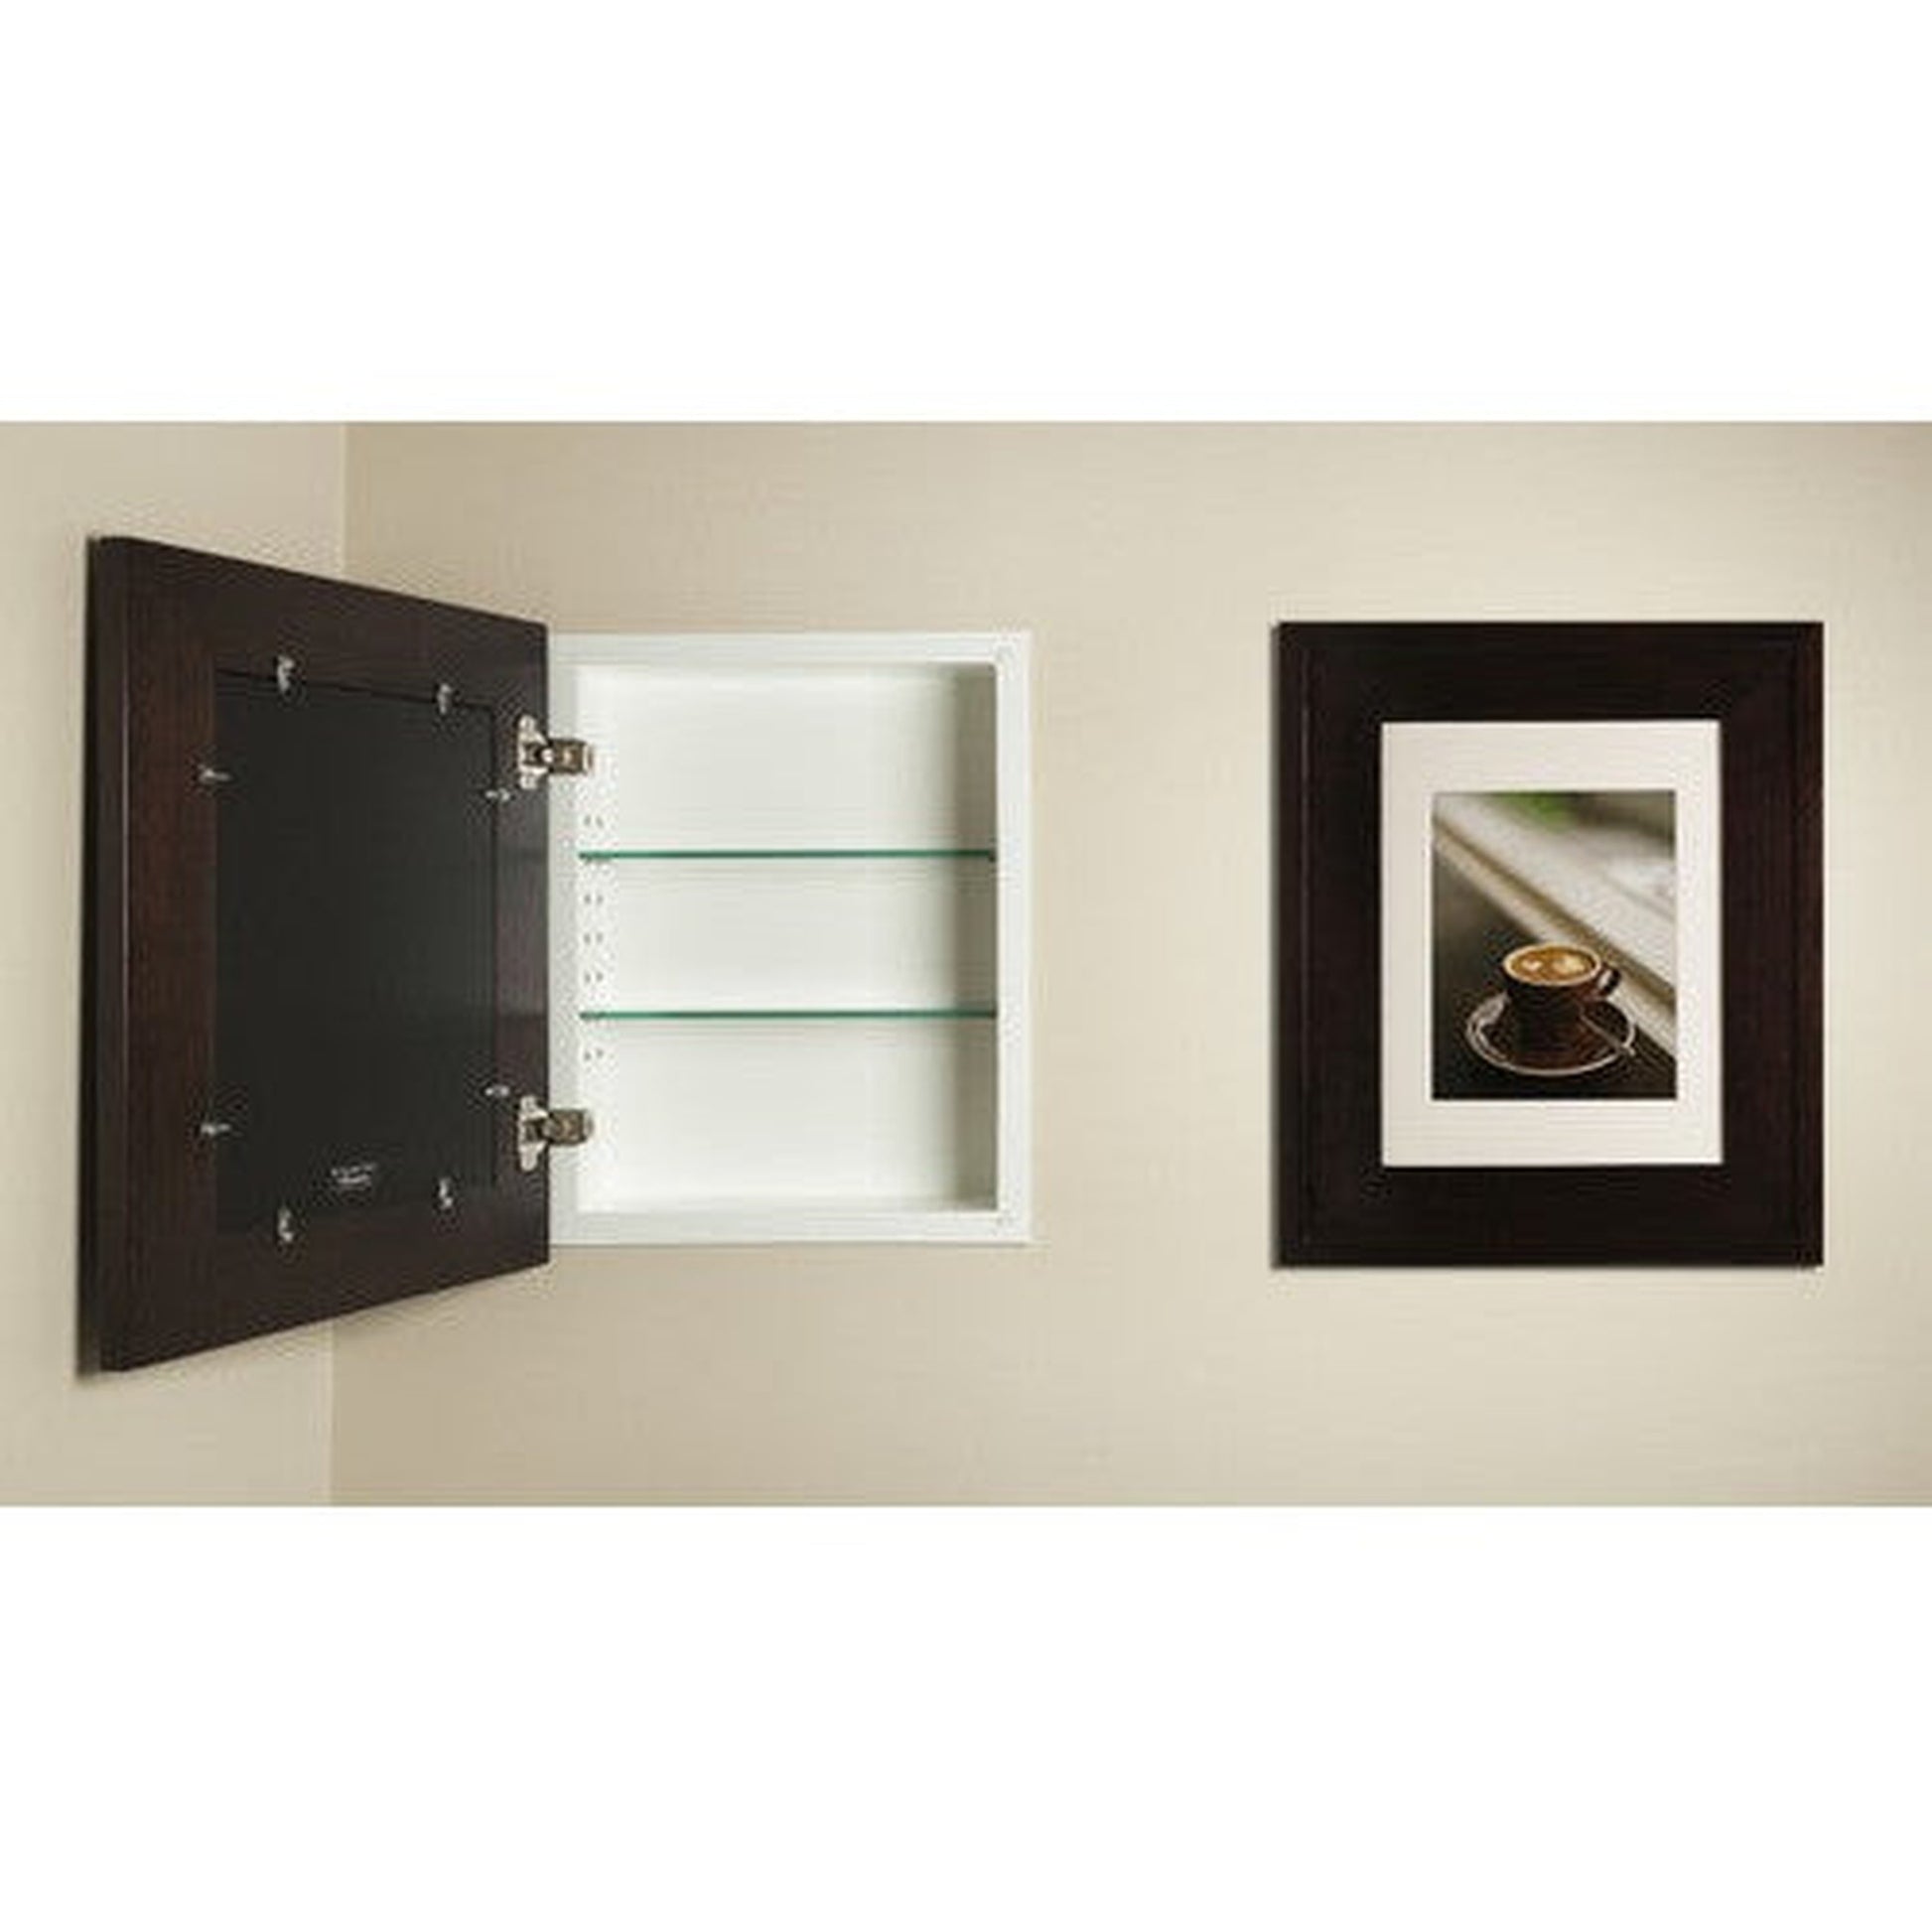 Fox Hollow Furnishings 14" x 18" Coffee Bean Large Standard 4" Depth Recessed Picture Frame Medicine Cabinet With White Matting